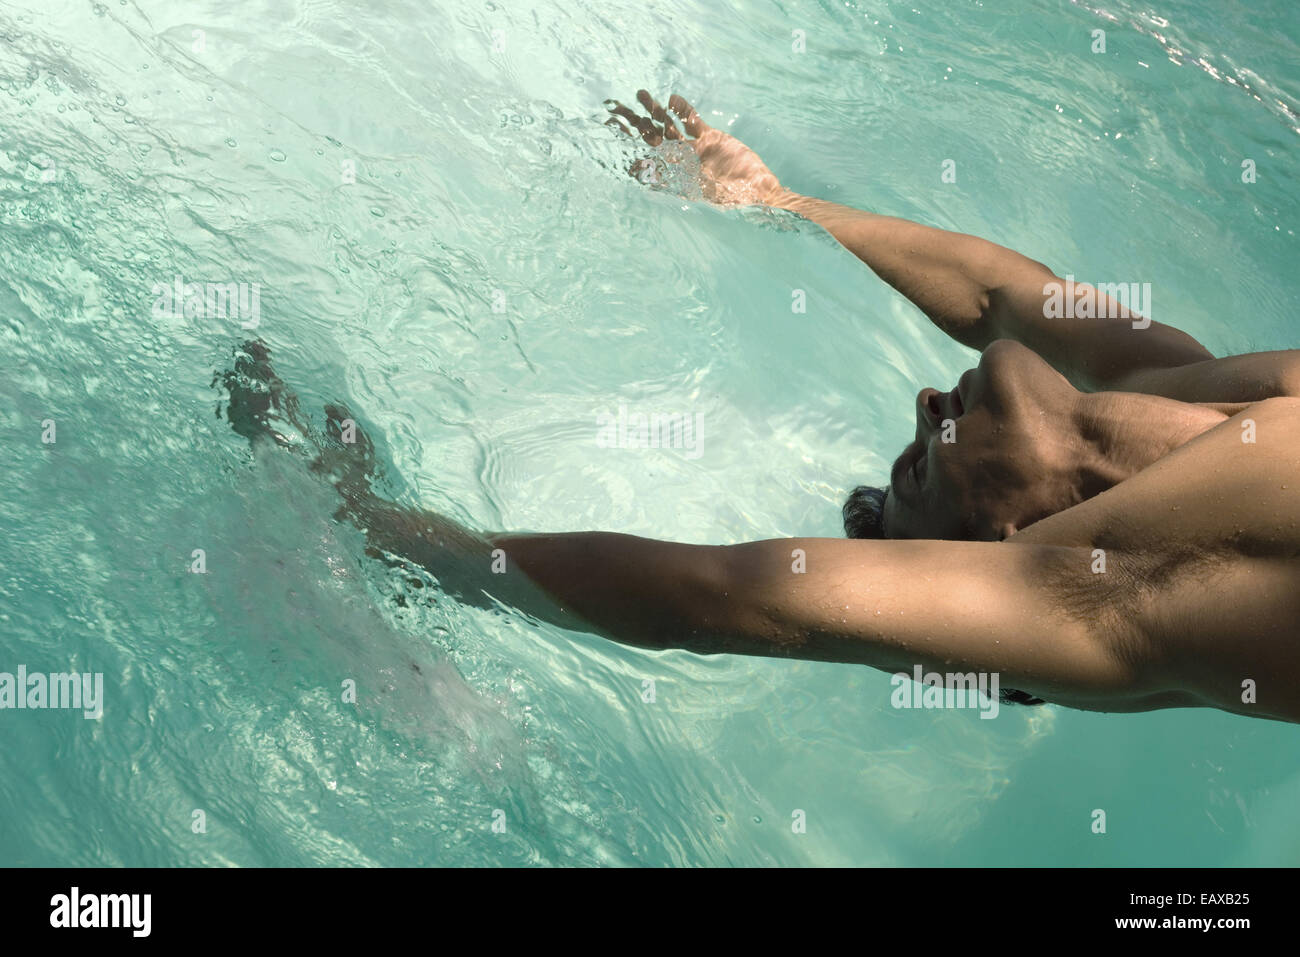 Man leaning backward over pool, arms in water Stock Photo